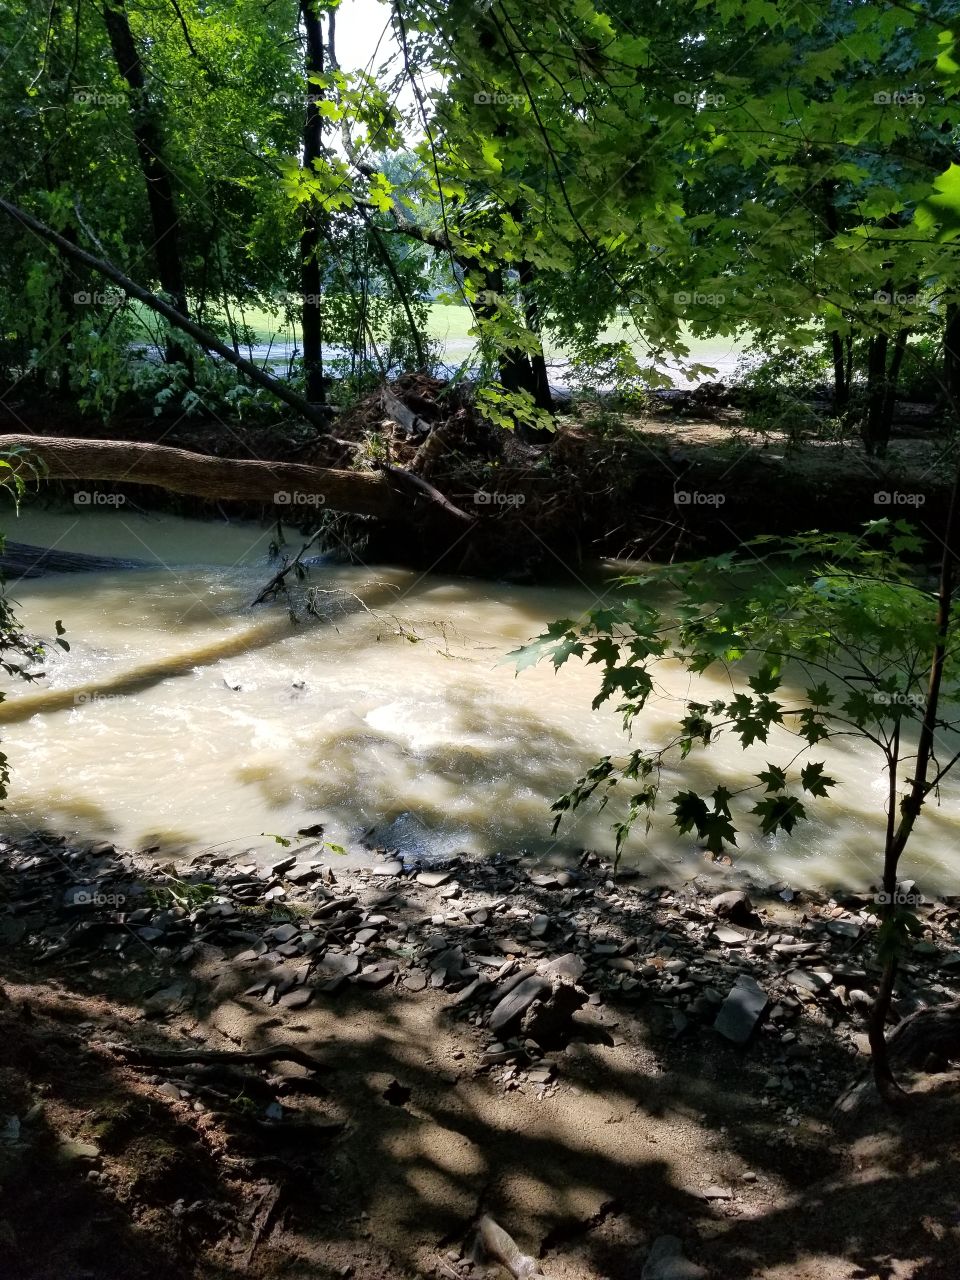 a usually docile creek, raged for 12 hours. taking down trees and flooding homes. August 2018